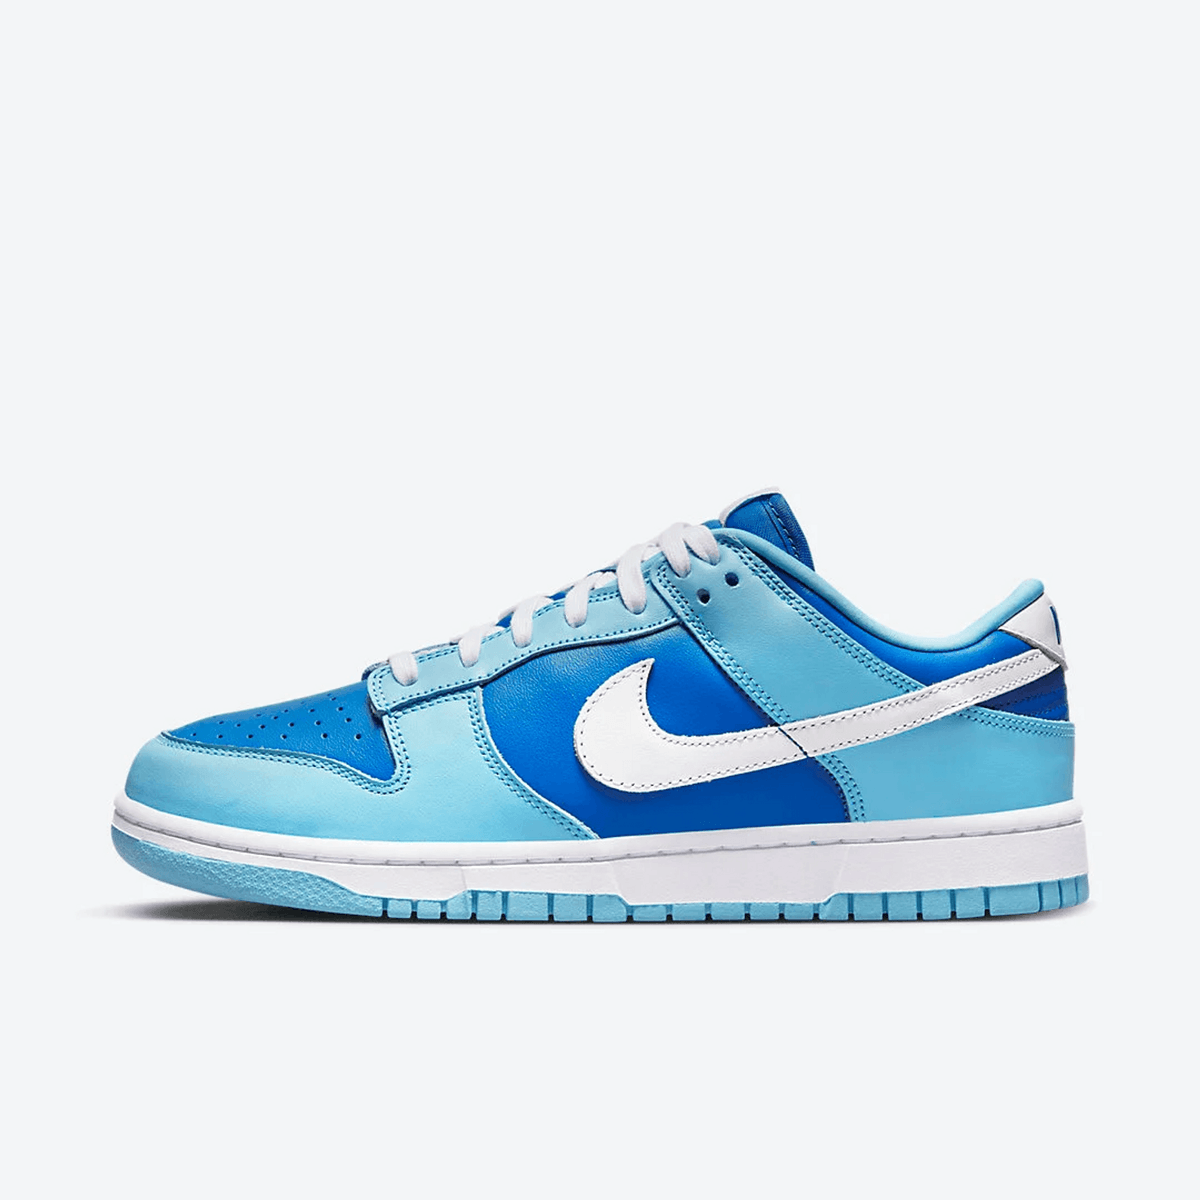 The Nike Dunk Low Craze Continues with the Brand New Dunk Low Argon